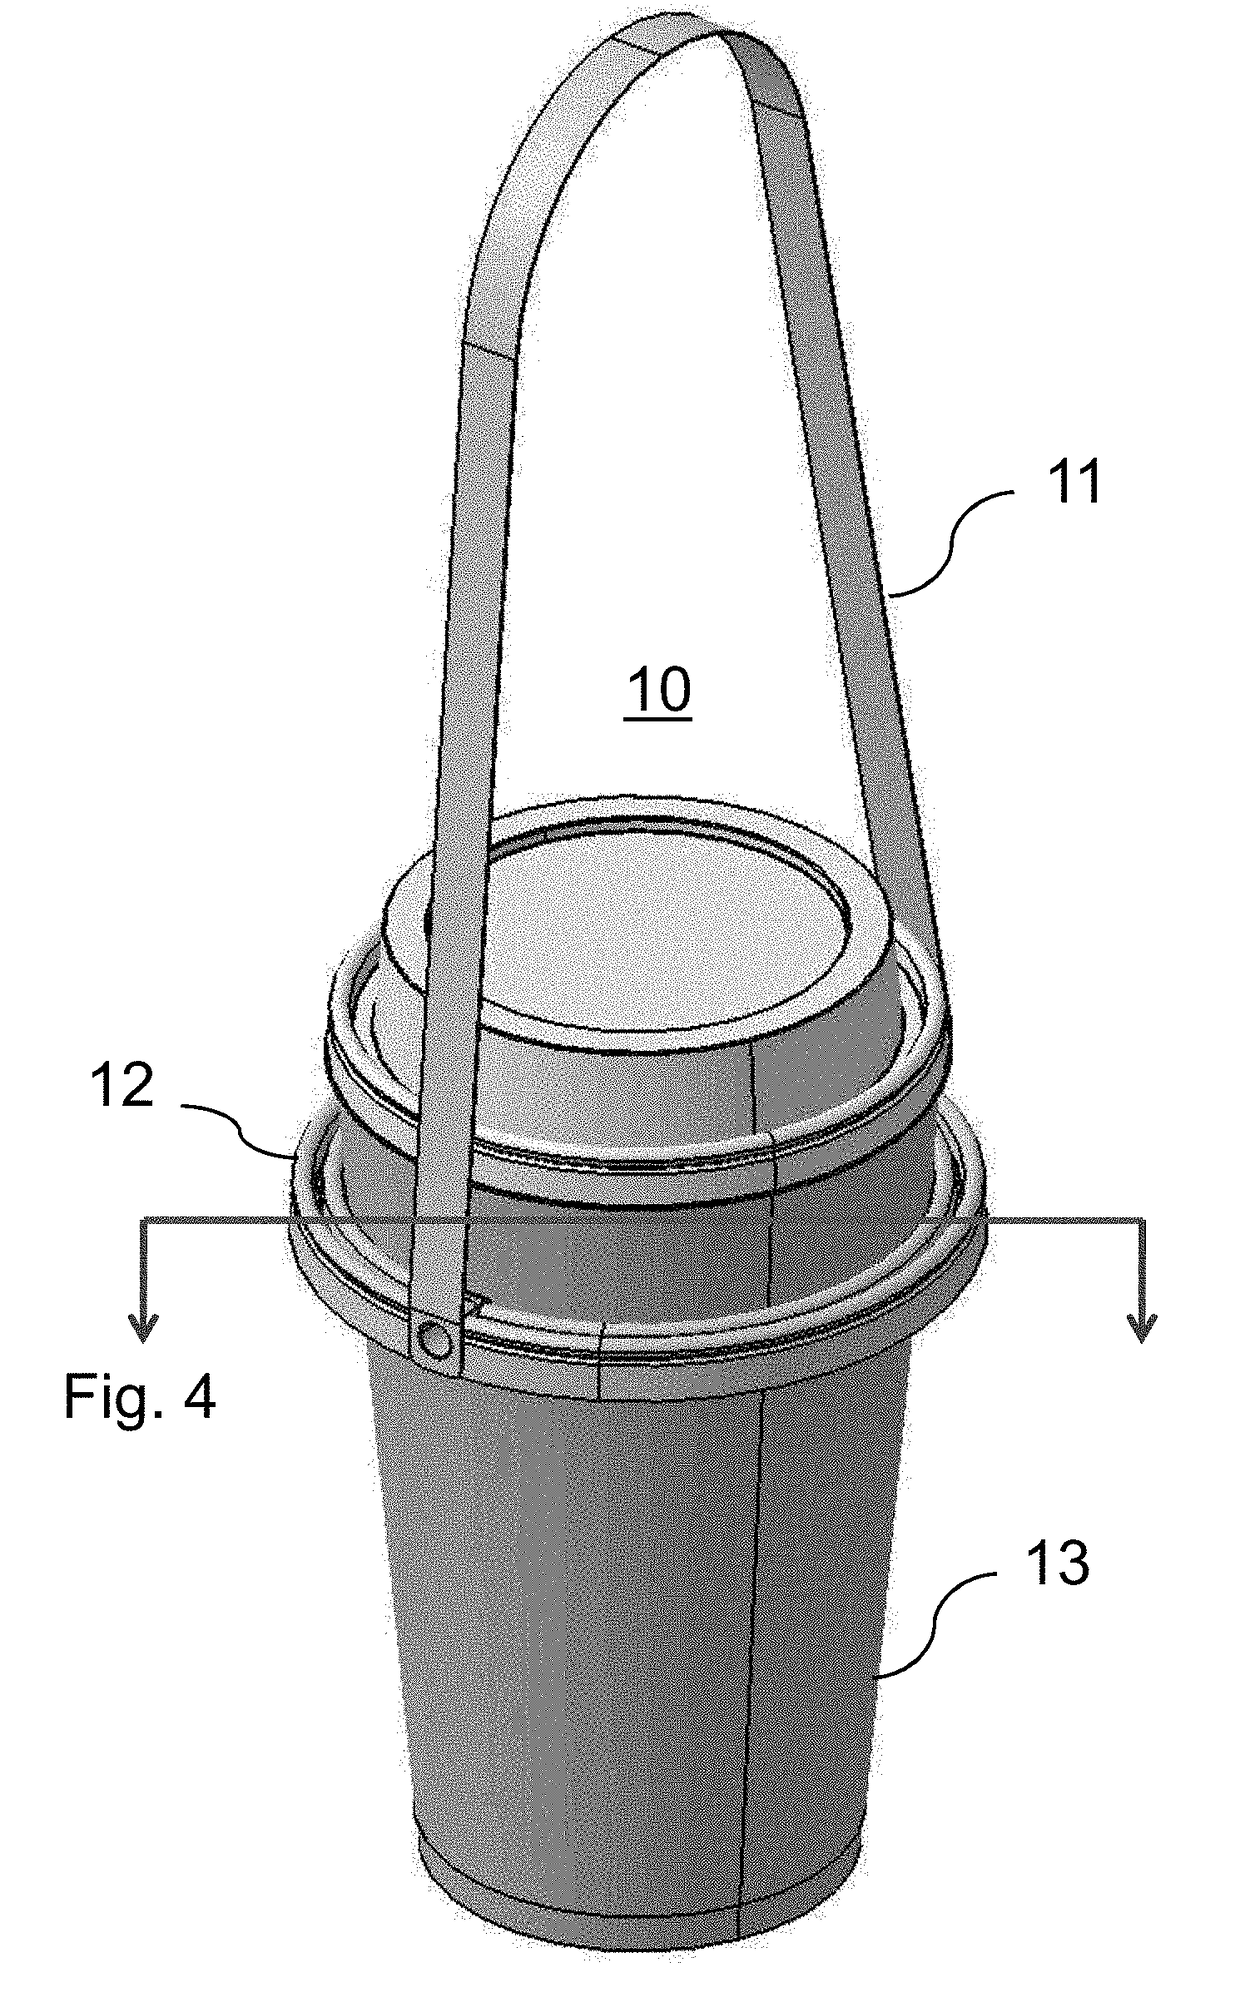 Container sling assembly and method of use